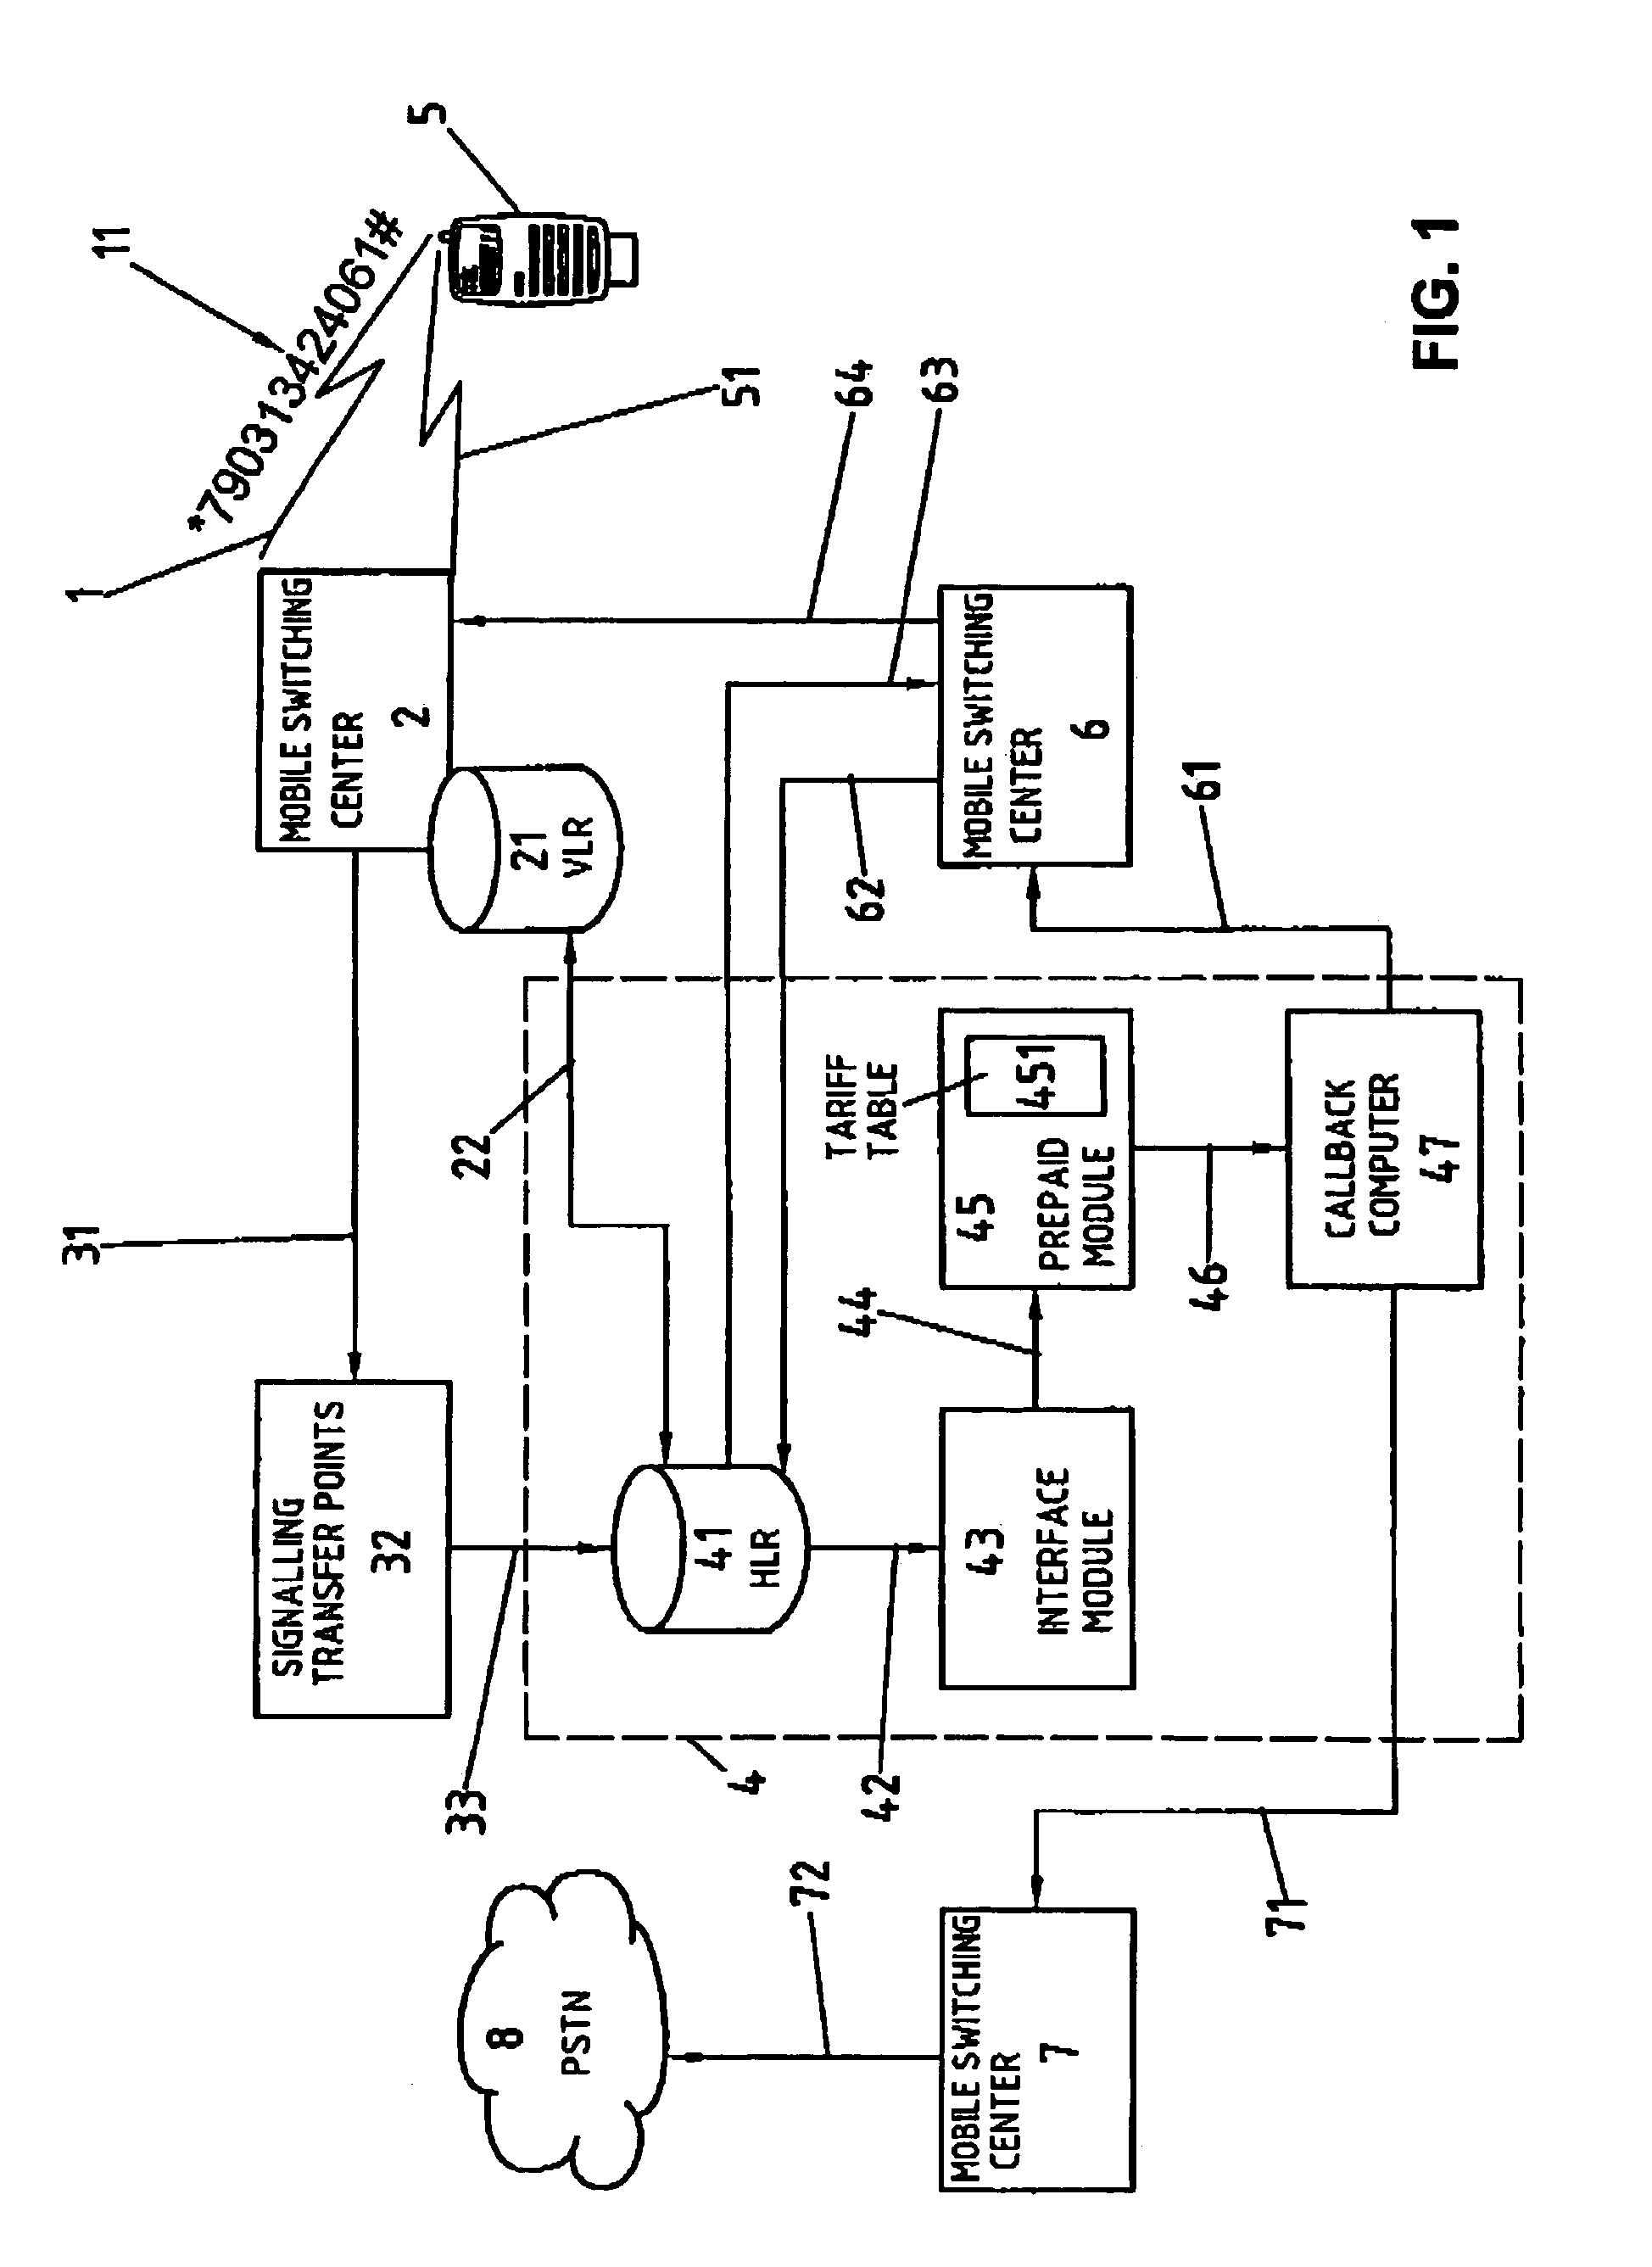 Telecommunication method and suitable system for establishing a connection with a mobile station